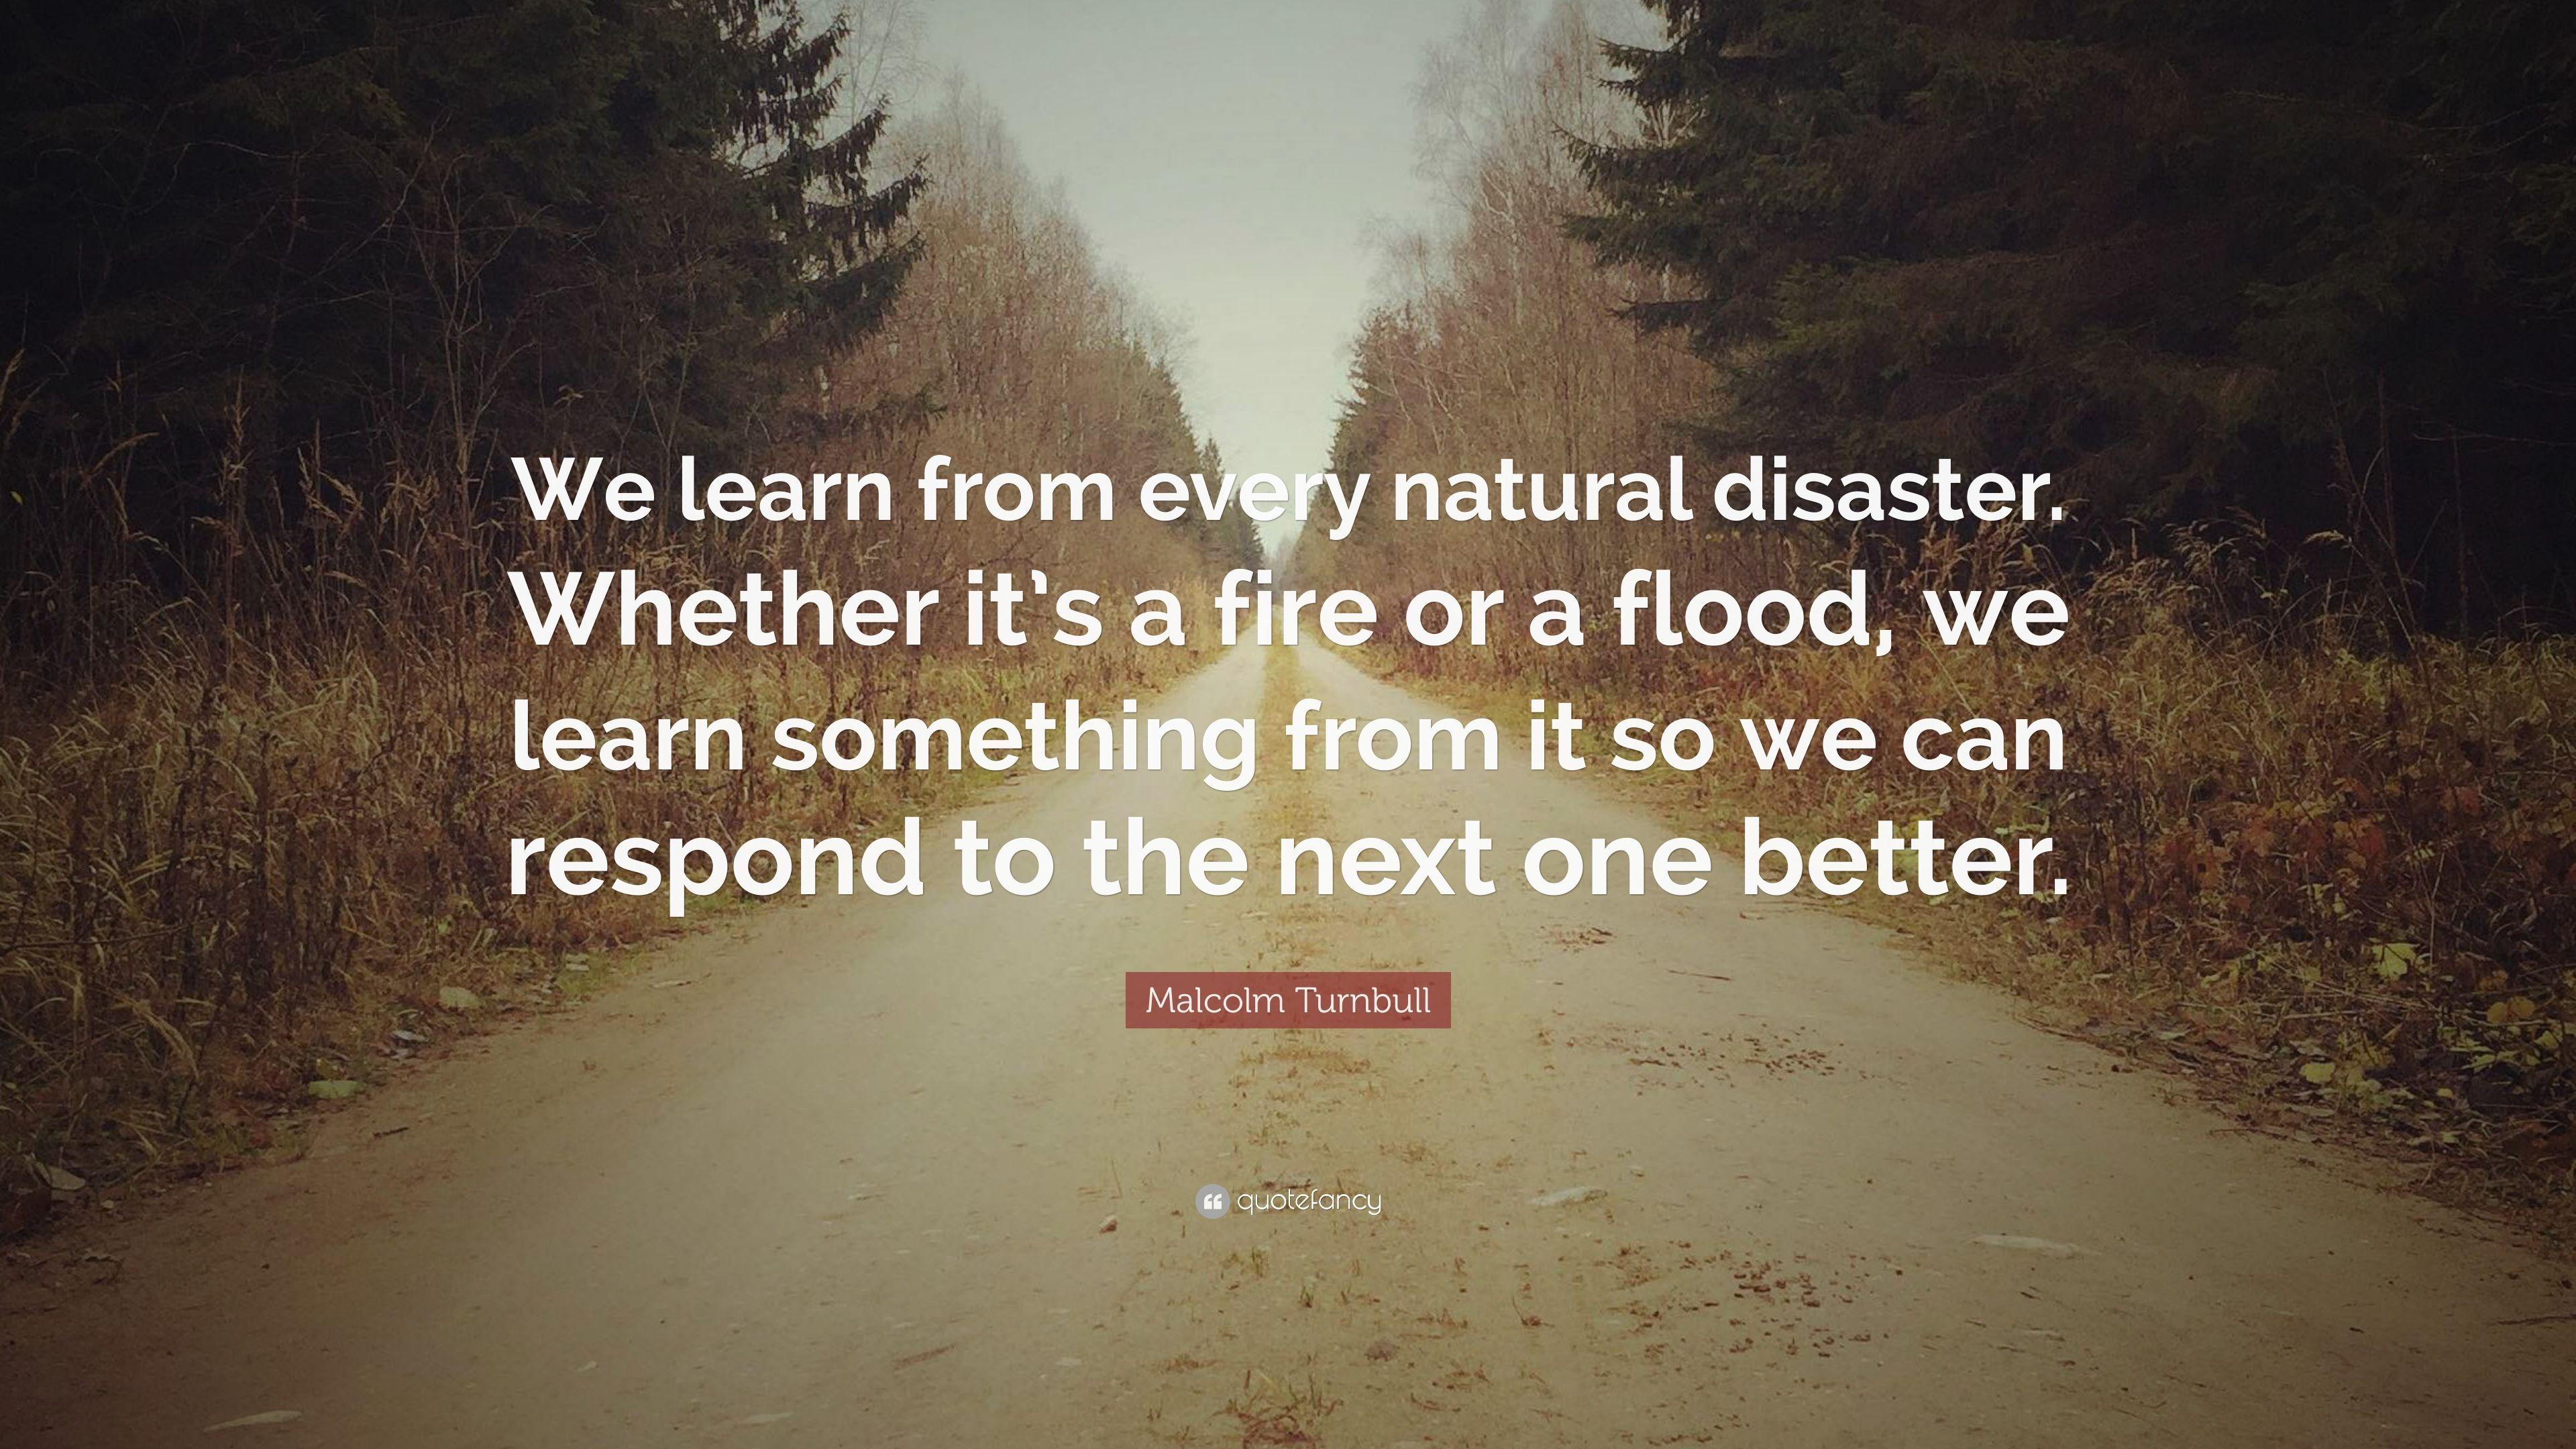 Malcolm Turnbull Quote: “We learn from every natural disaster